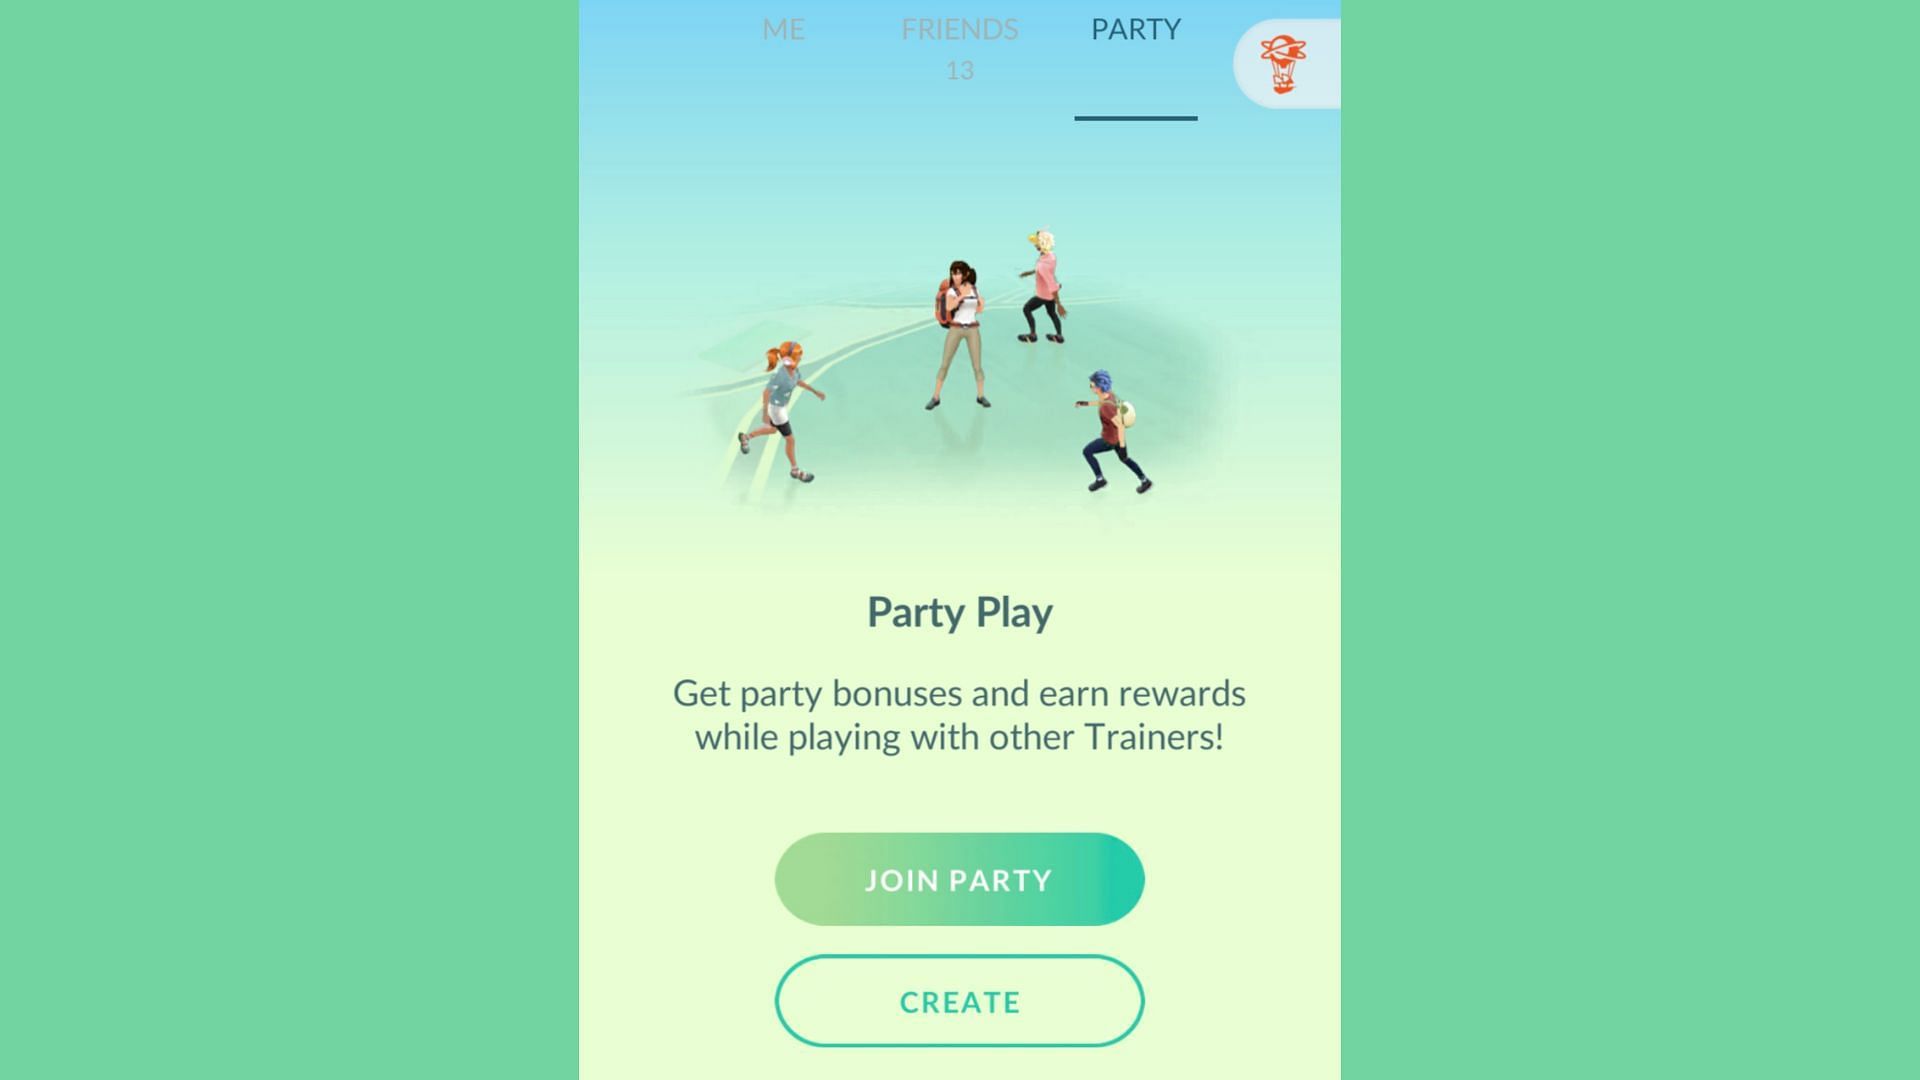 You can join or create a party in Pokemon GO (Image via The Pokemon Company)